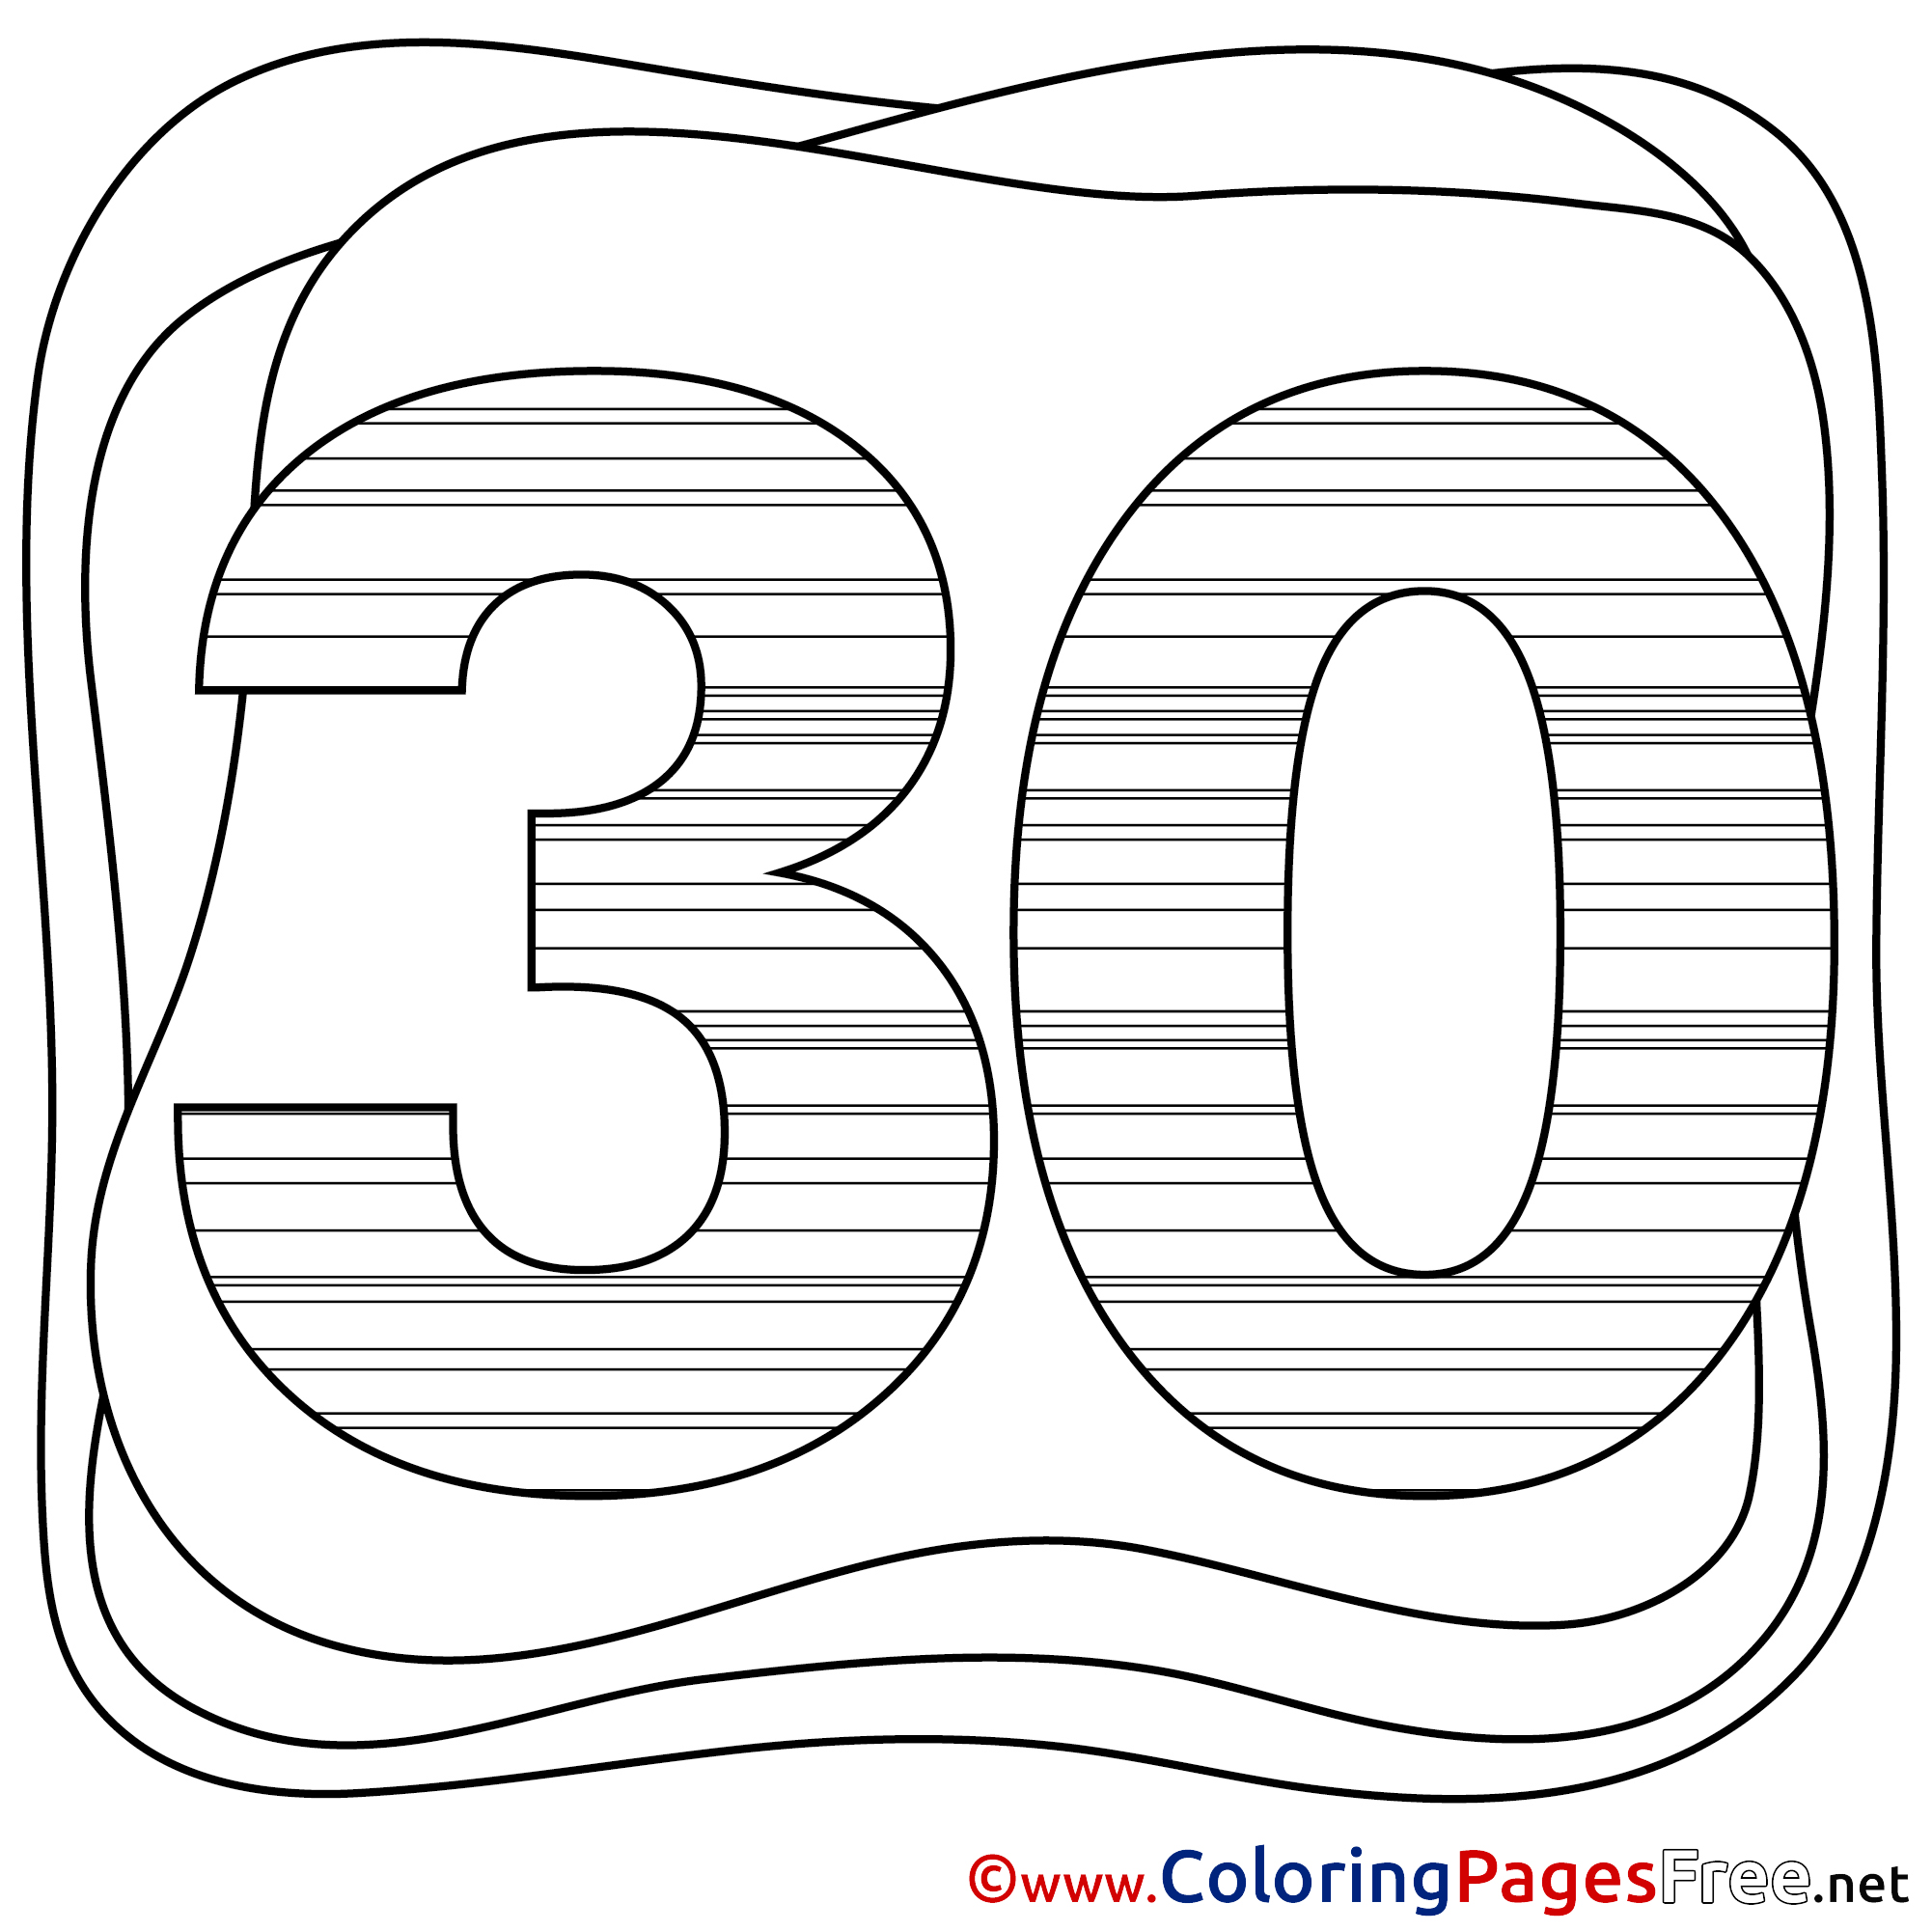 30 Years Happy Birthday Free Coloring Pages